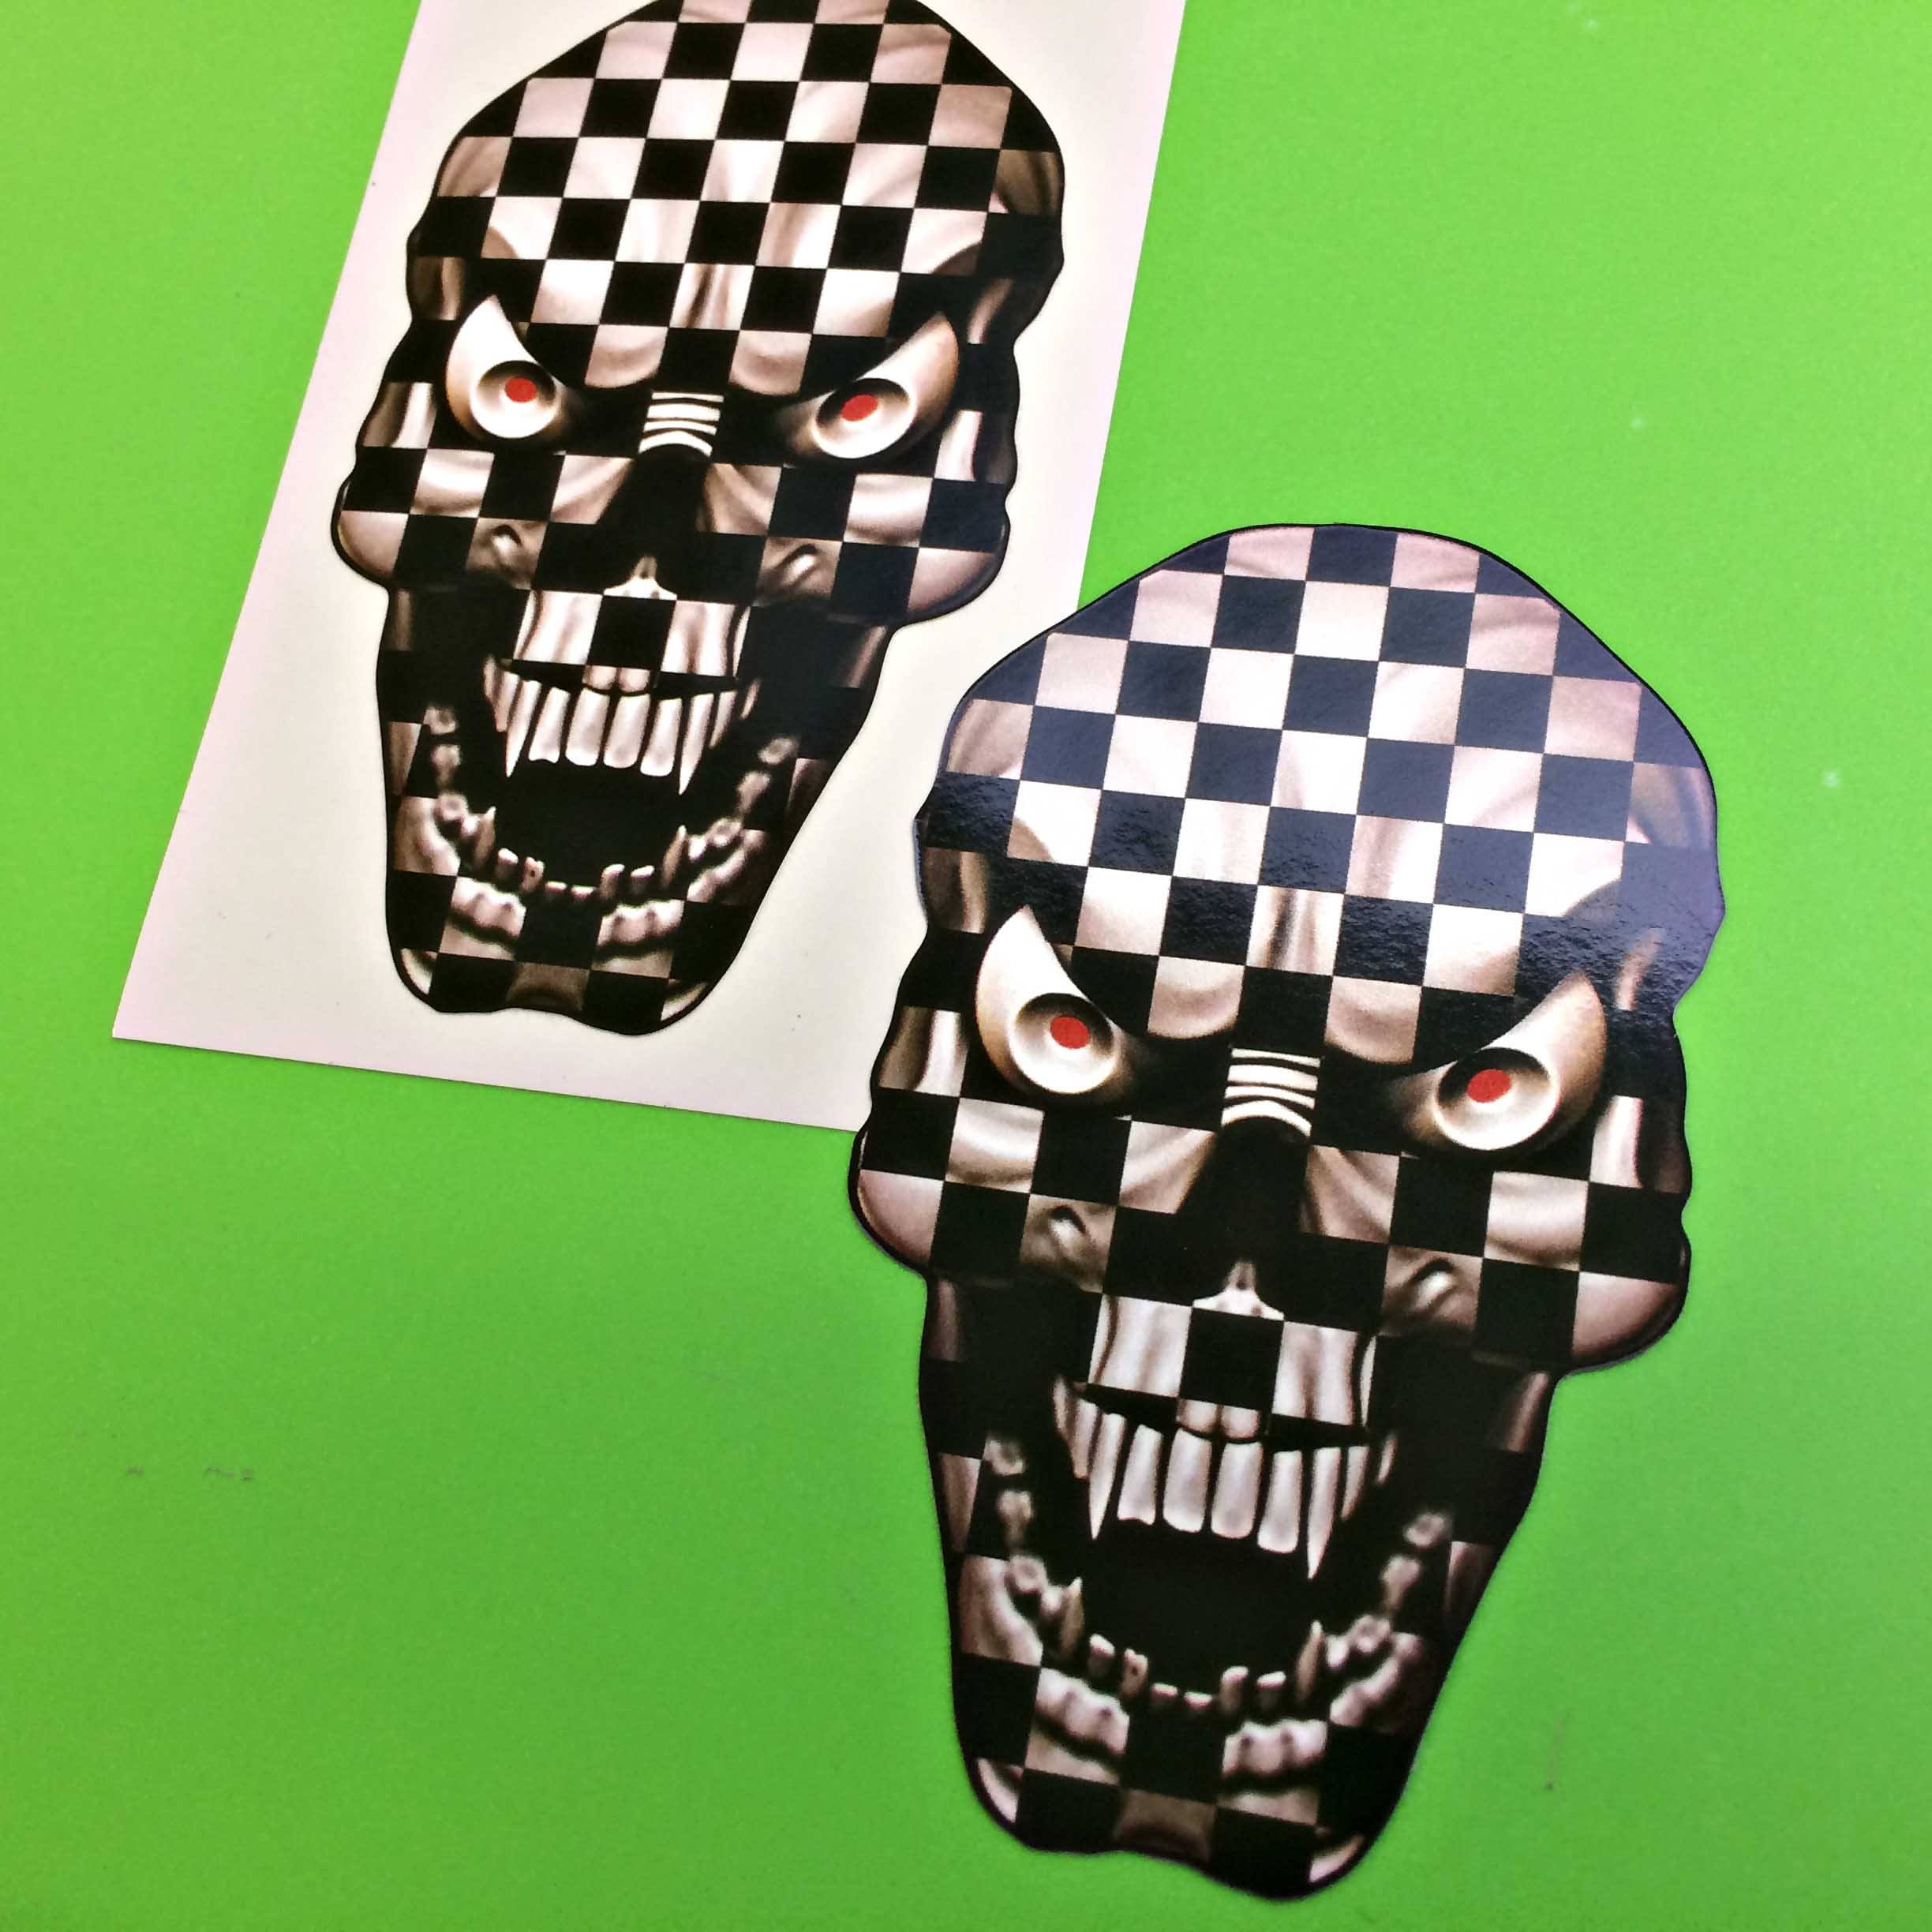 CHEQUERED SKULL STICKERS. A skull in black and white chequer with red eyes and sharp white teeth.